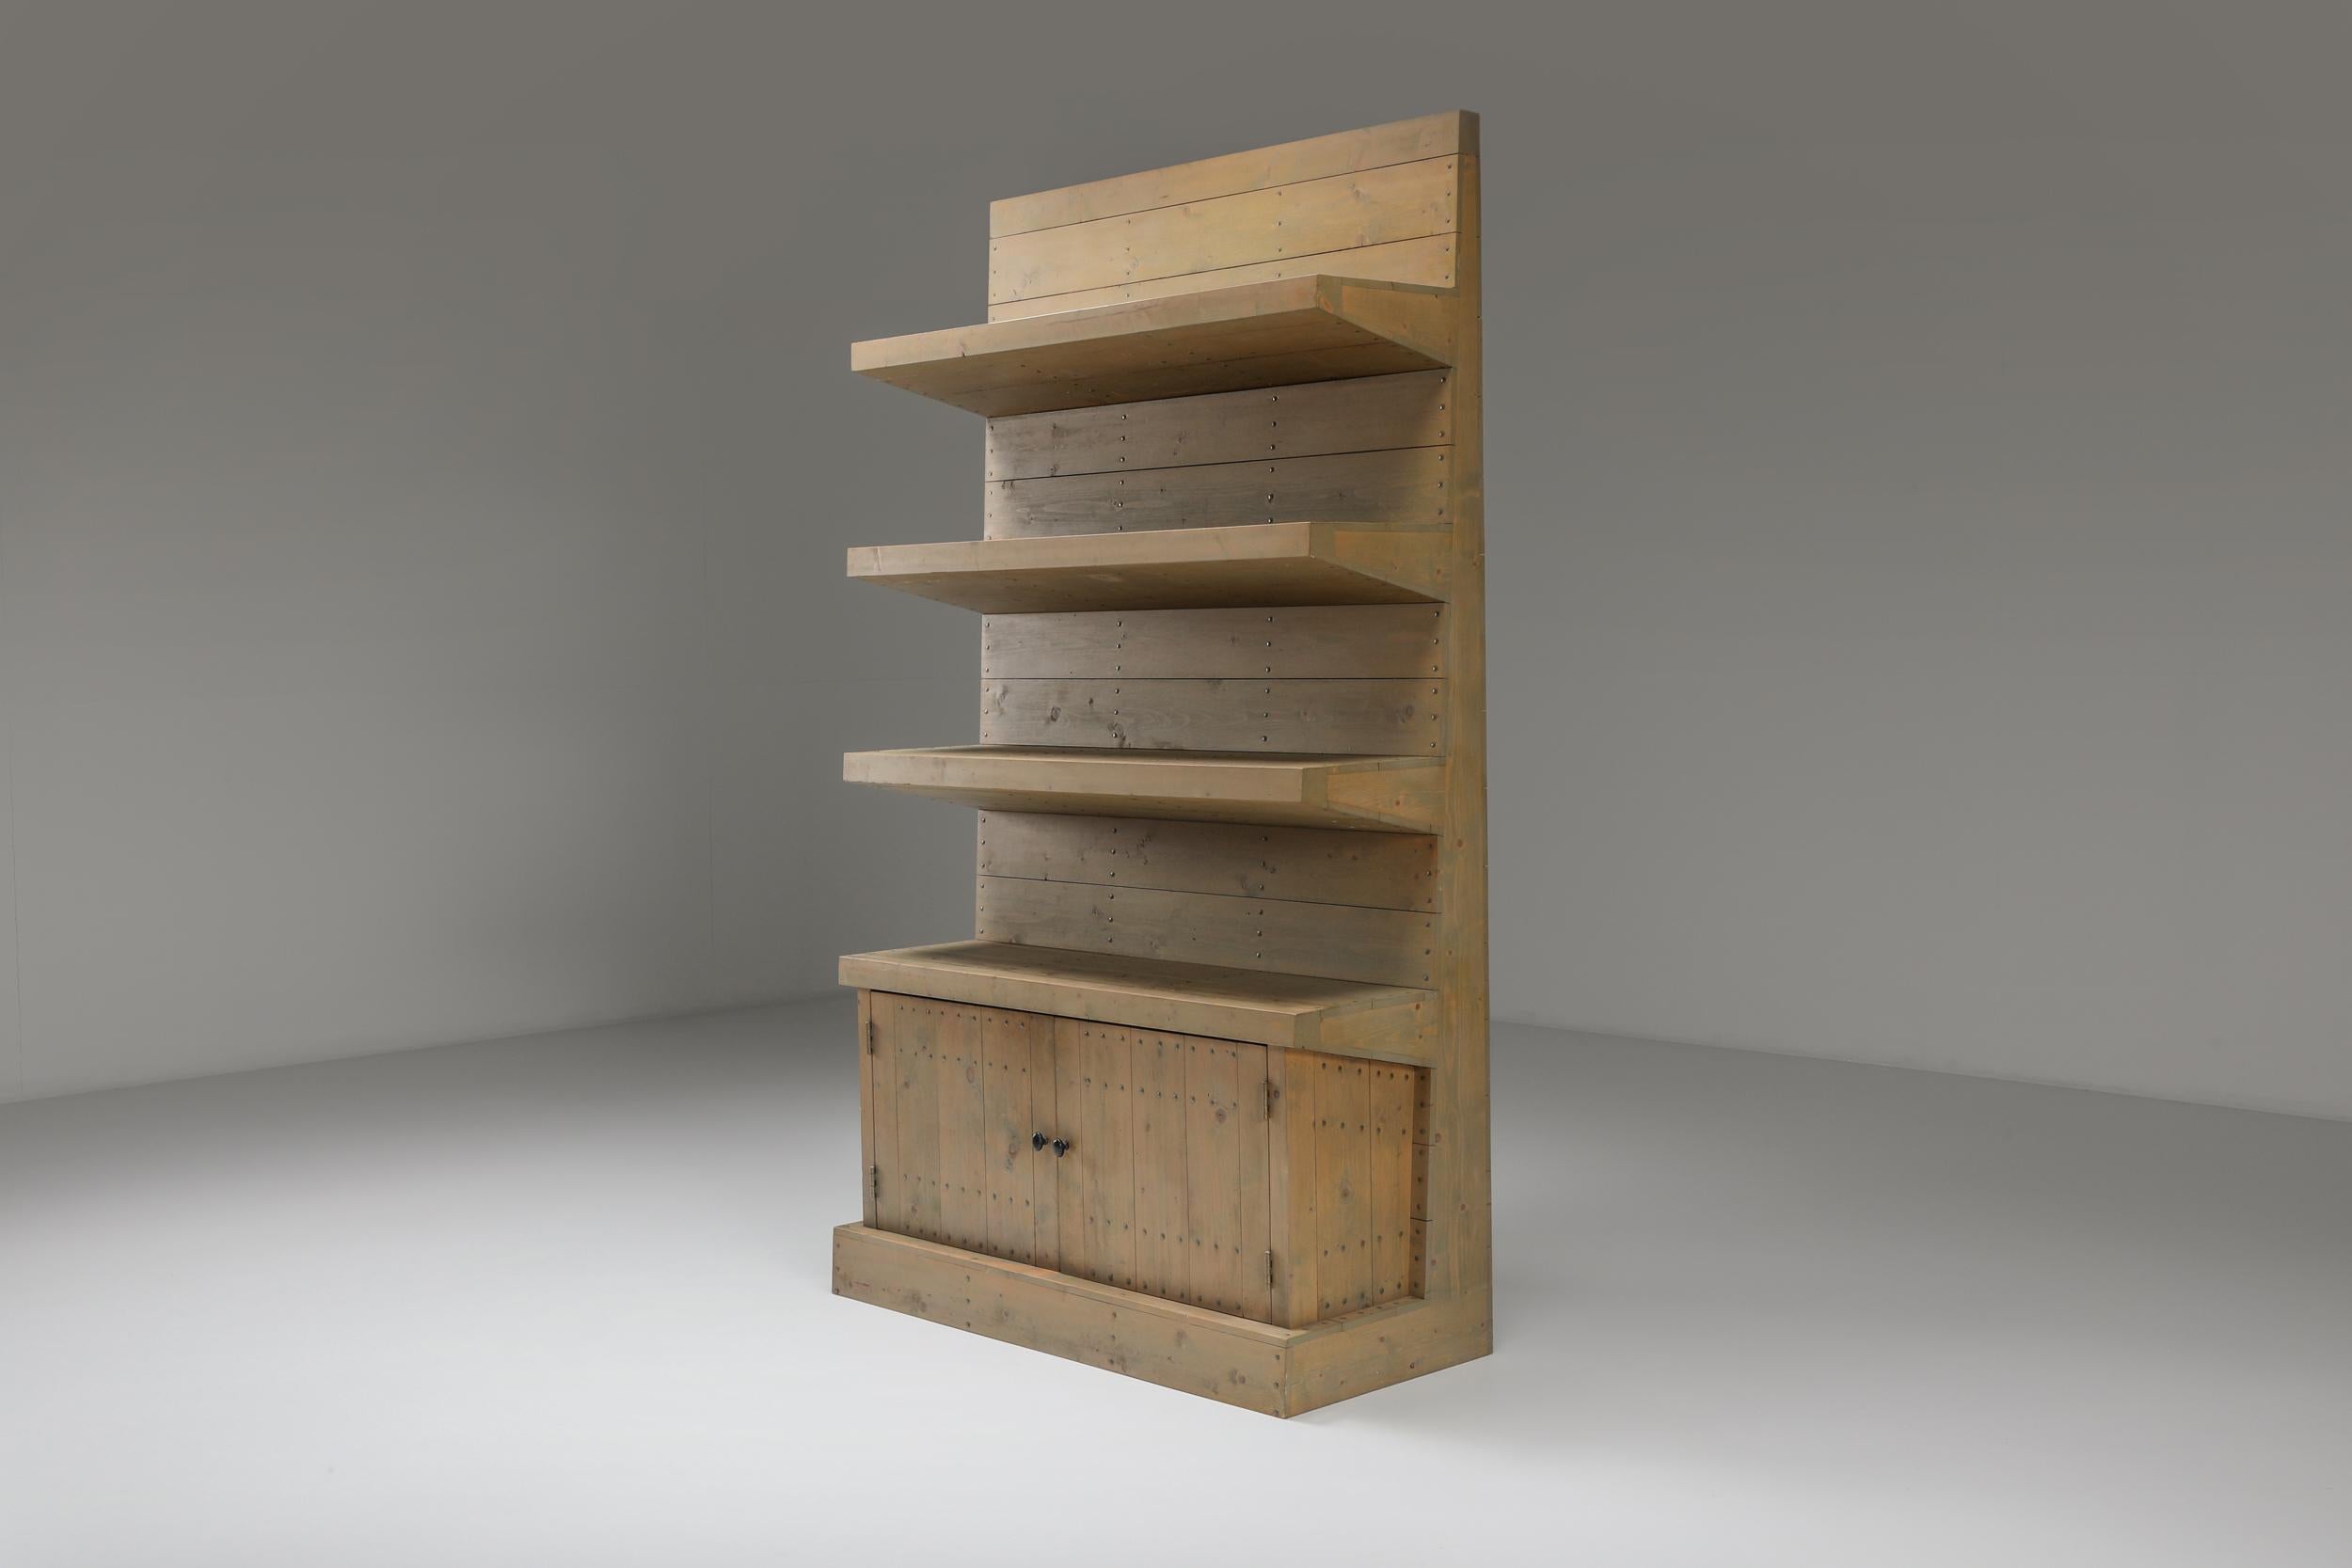 Late 20th Century Wall Unit by Dom Hans van der Laan in It's Typical Minimal Brutalist Style